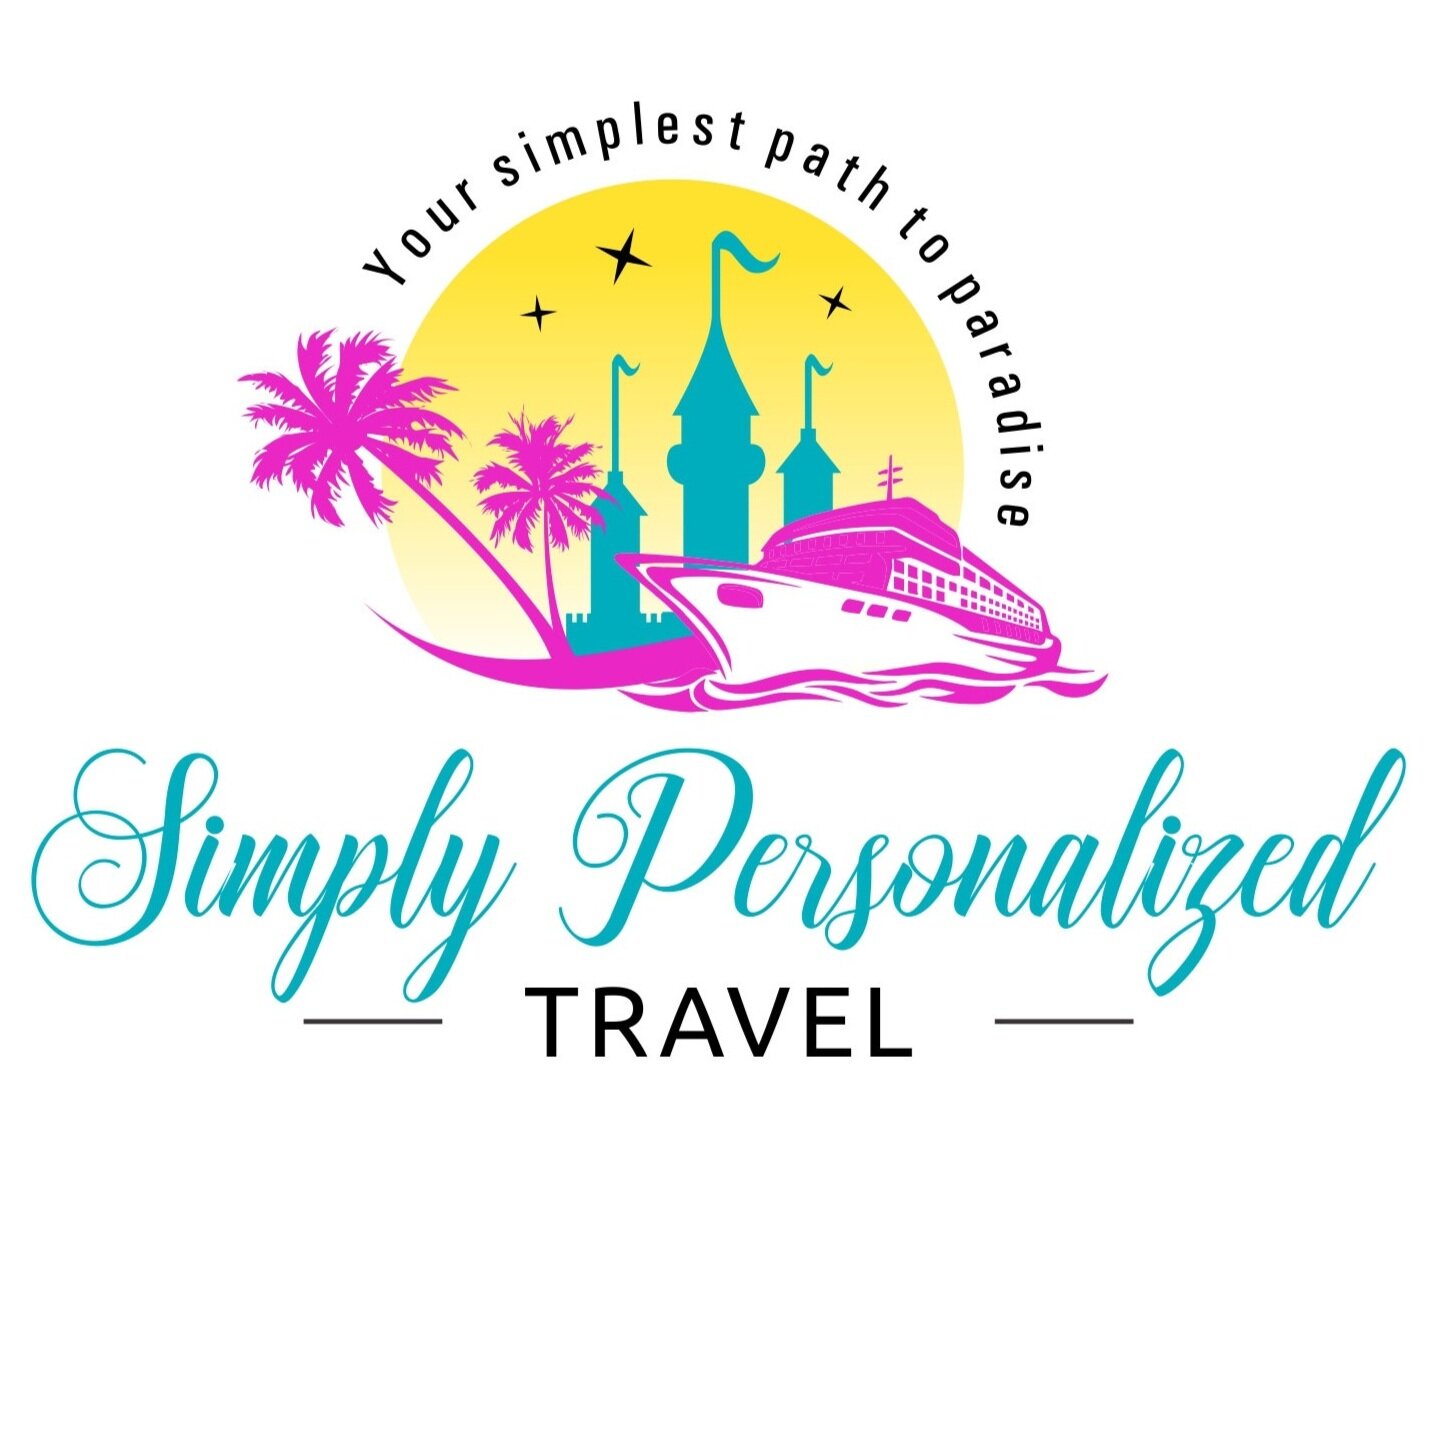 Simply Personalized Travel